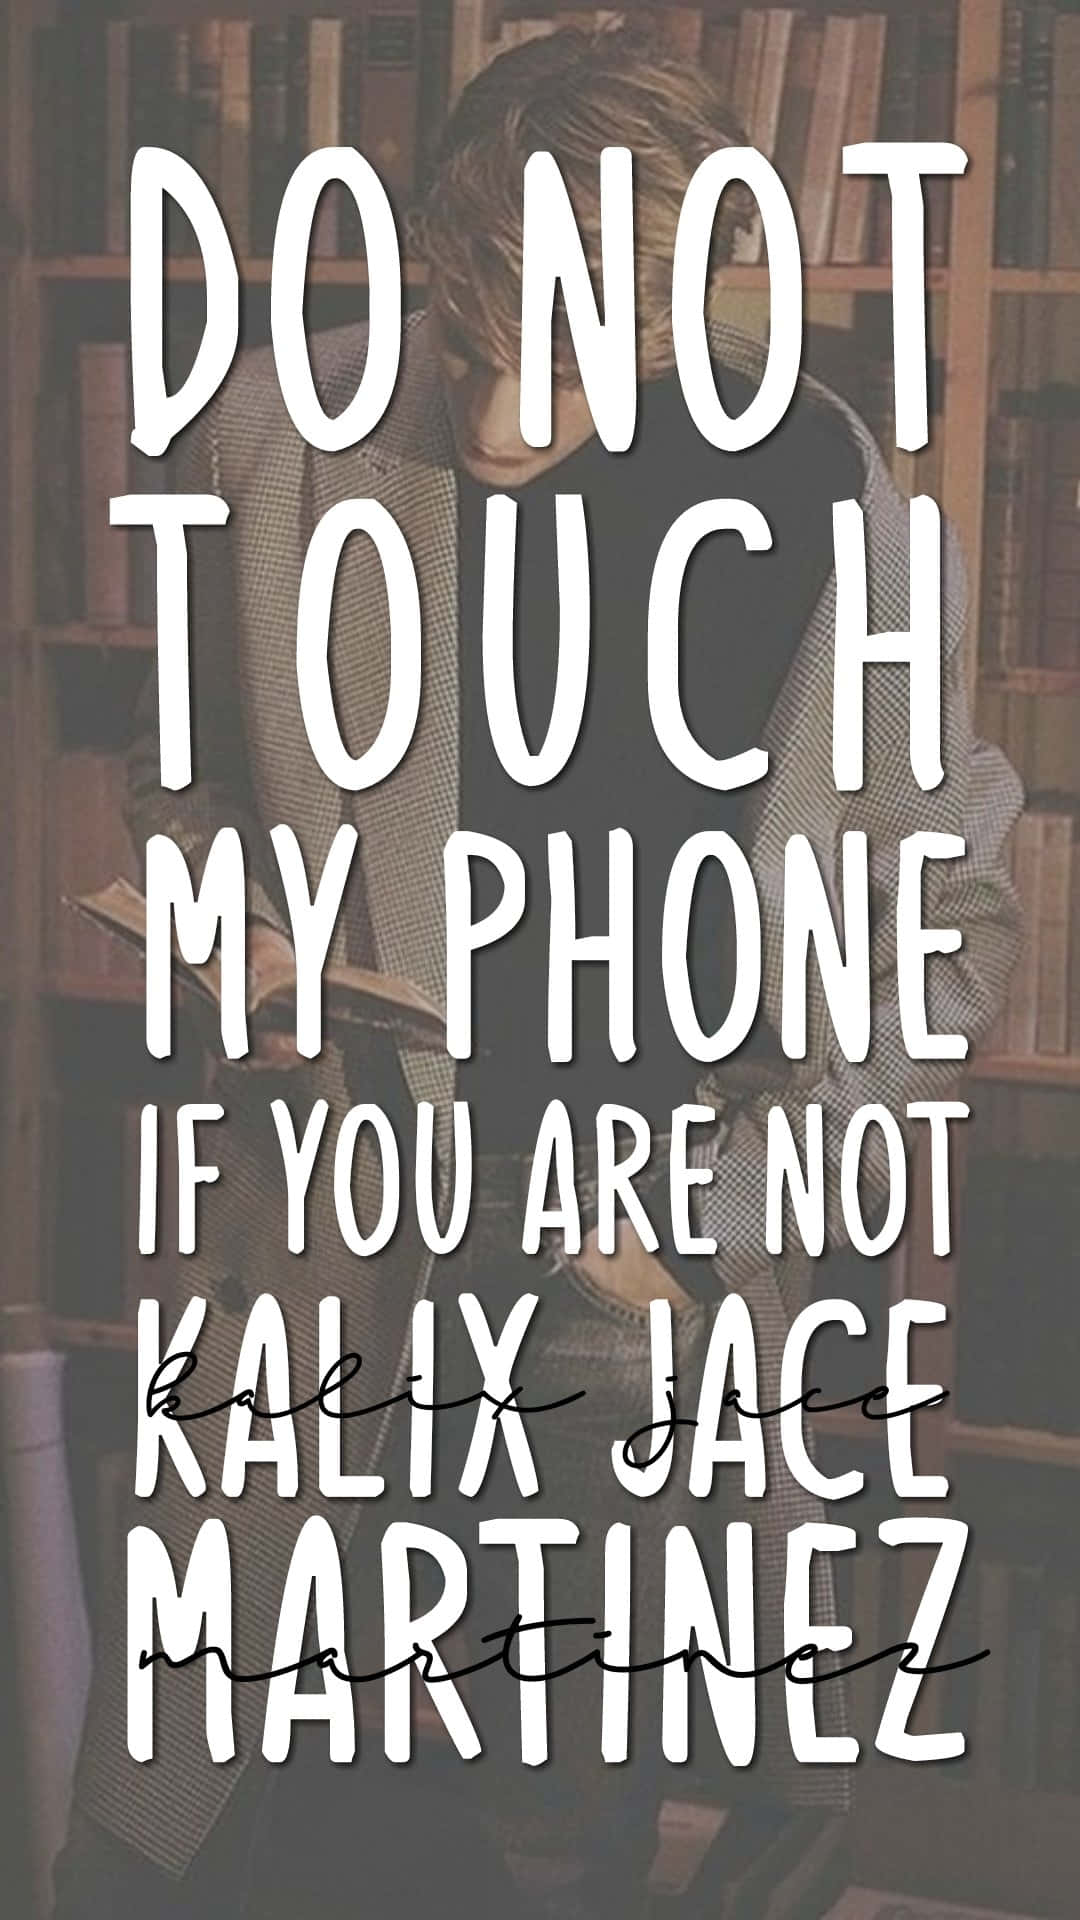 Do Not Touch My Phone If You Are Not Kalix Jace Martinez Wallpaper